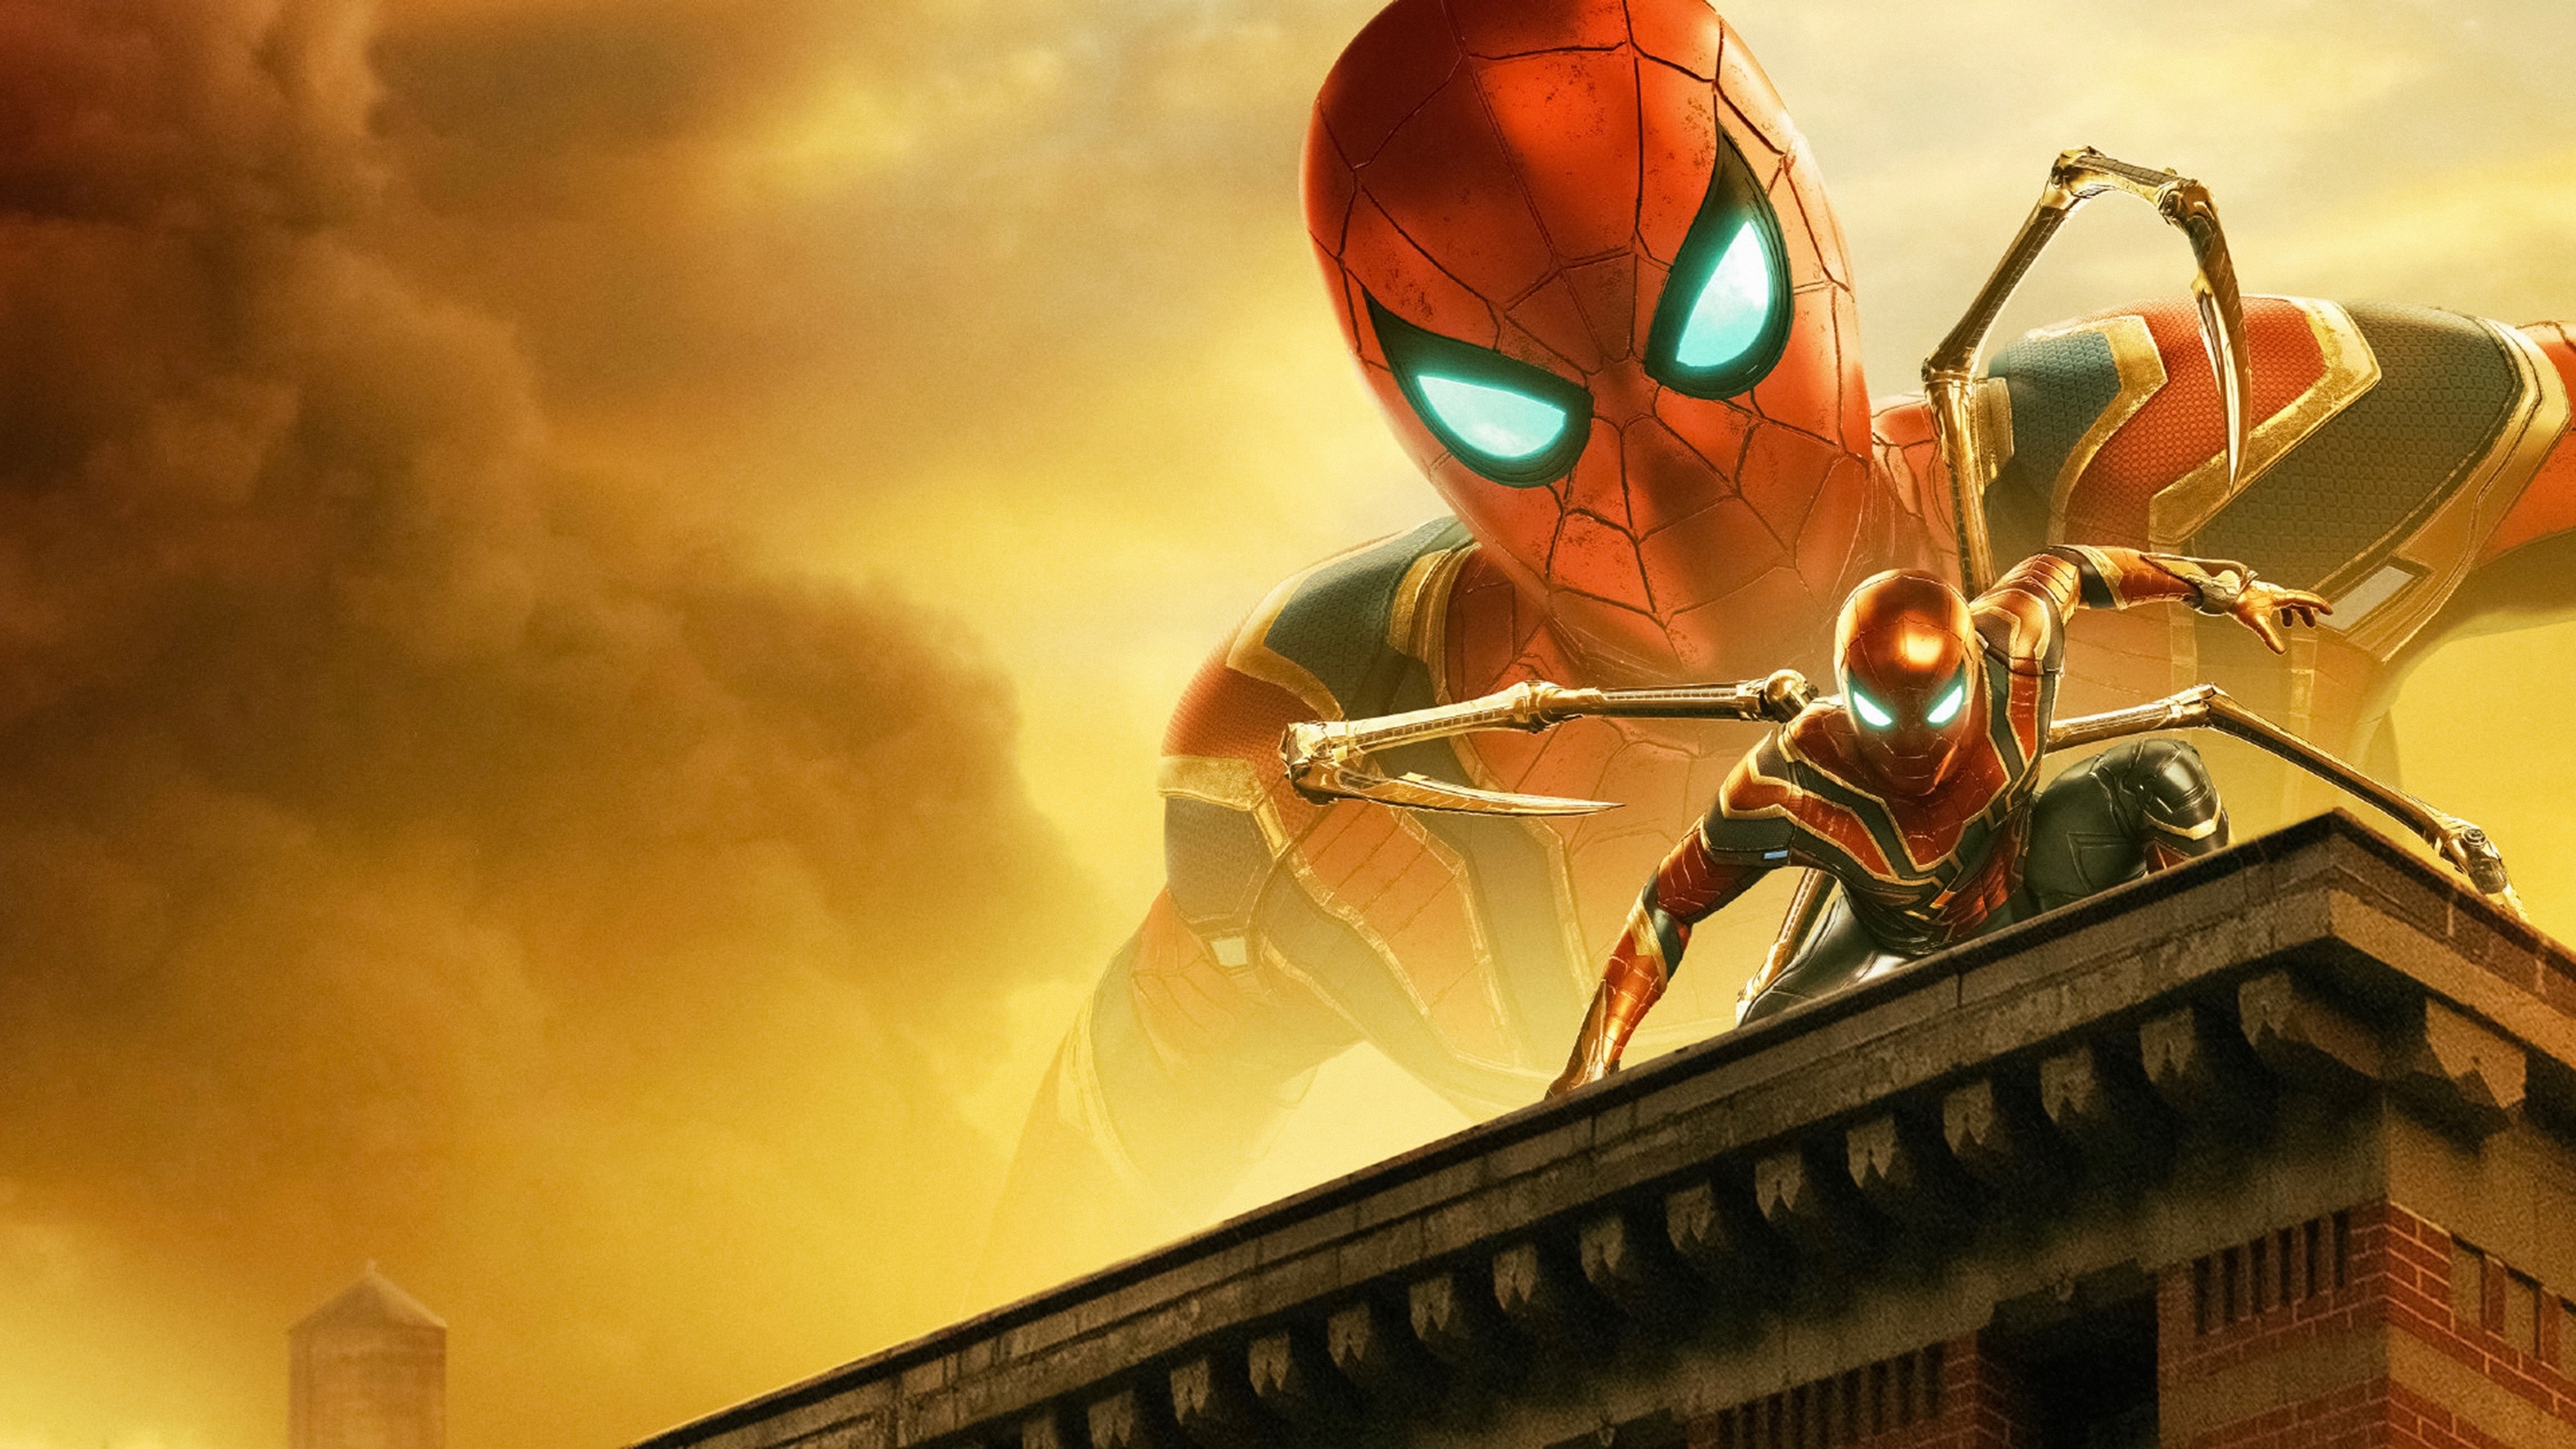 1080x2400 4k Spider Man Far From Home 2019 1080x2400 Resolution Wallpaper Hd Movies 4k Wallpapers Images Photos And Background